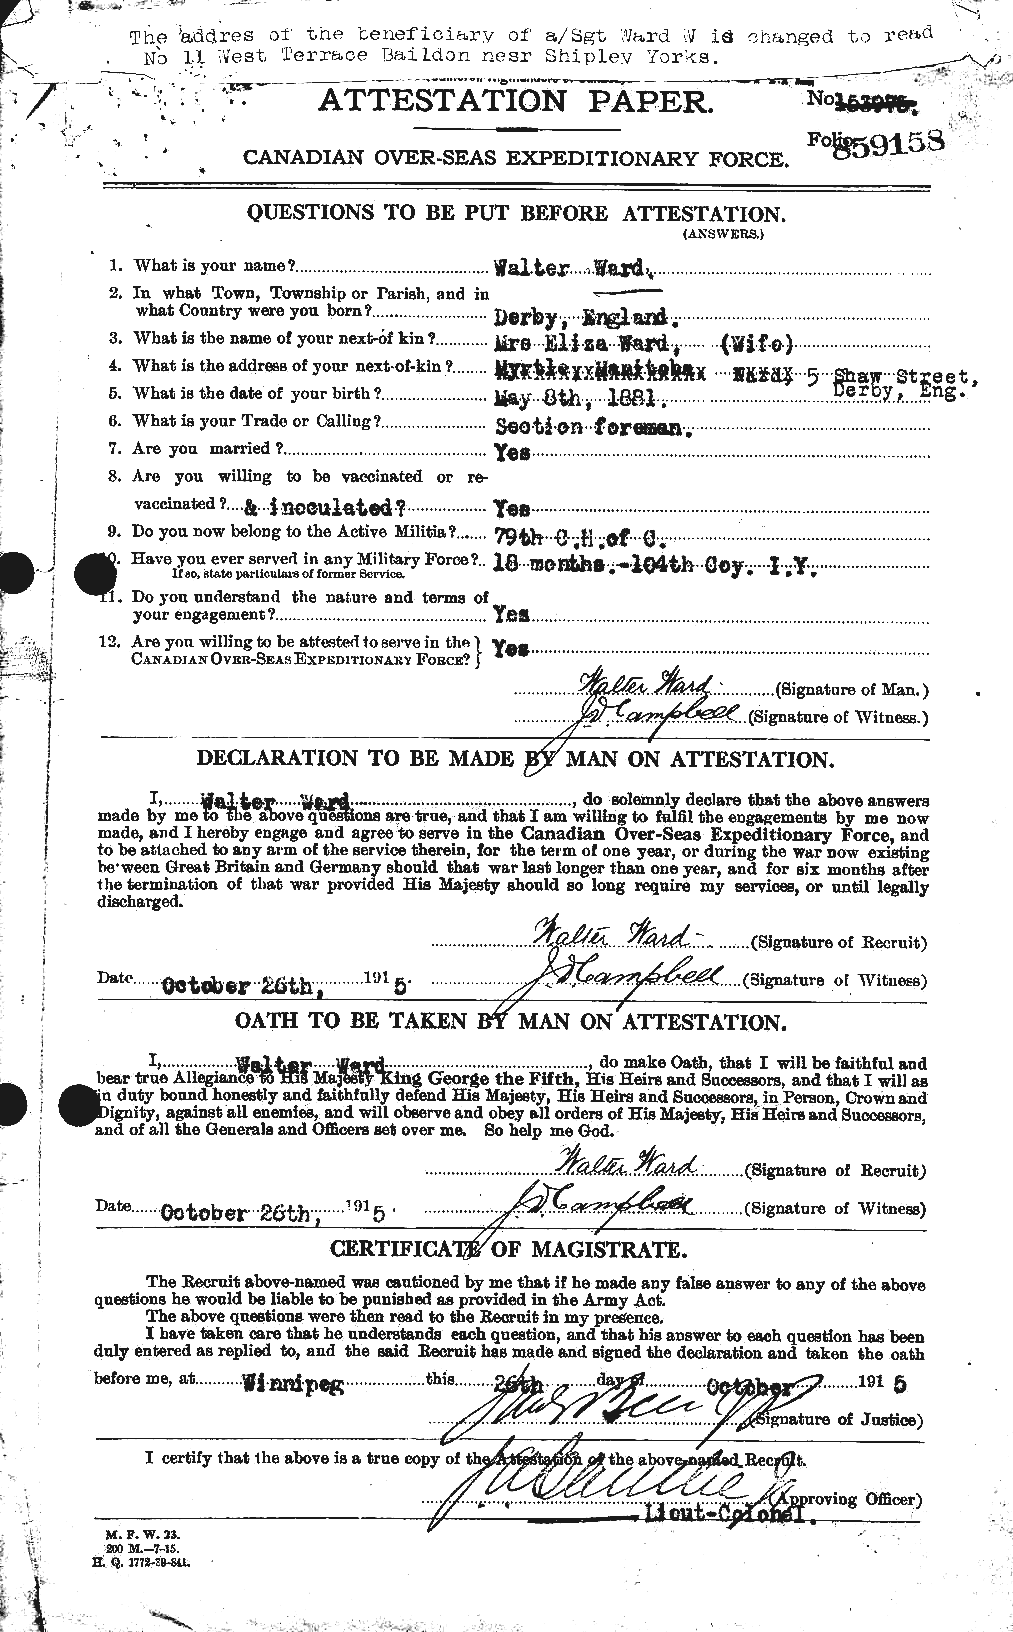 Personnel Records of the First World War - CEF 659752a